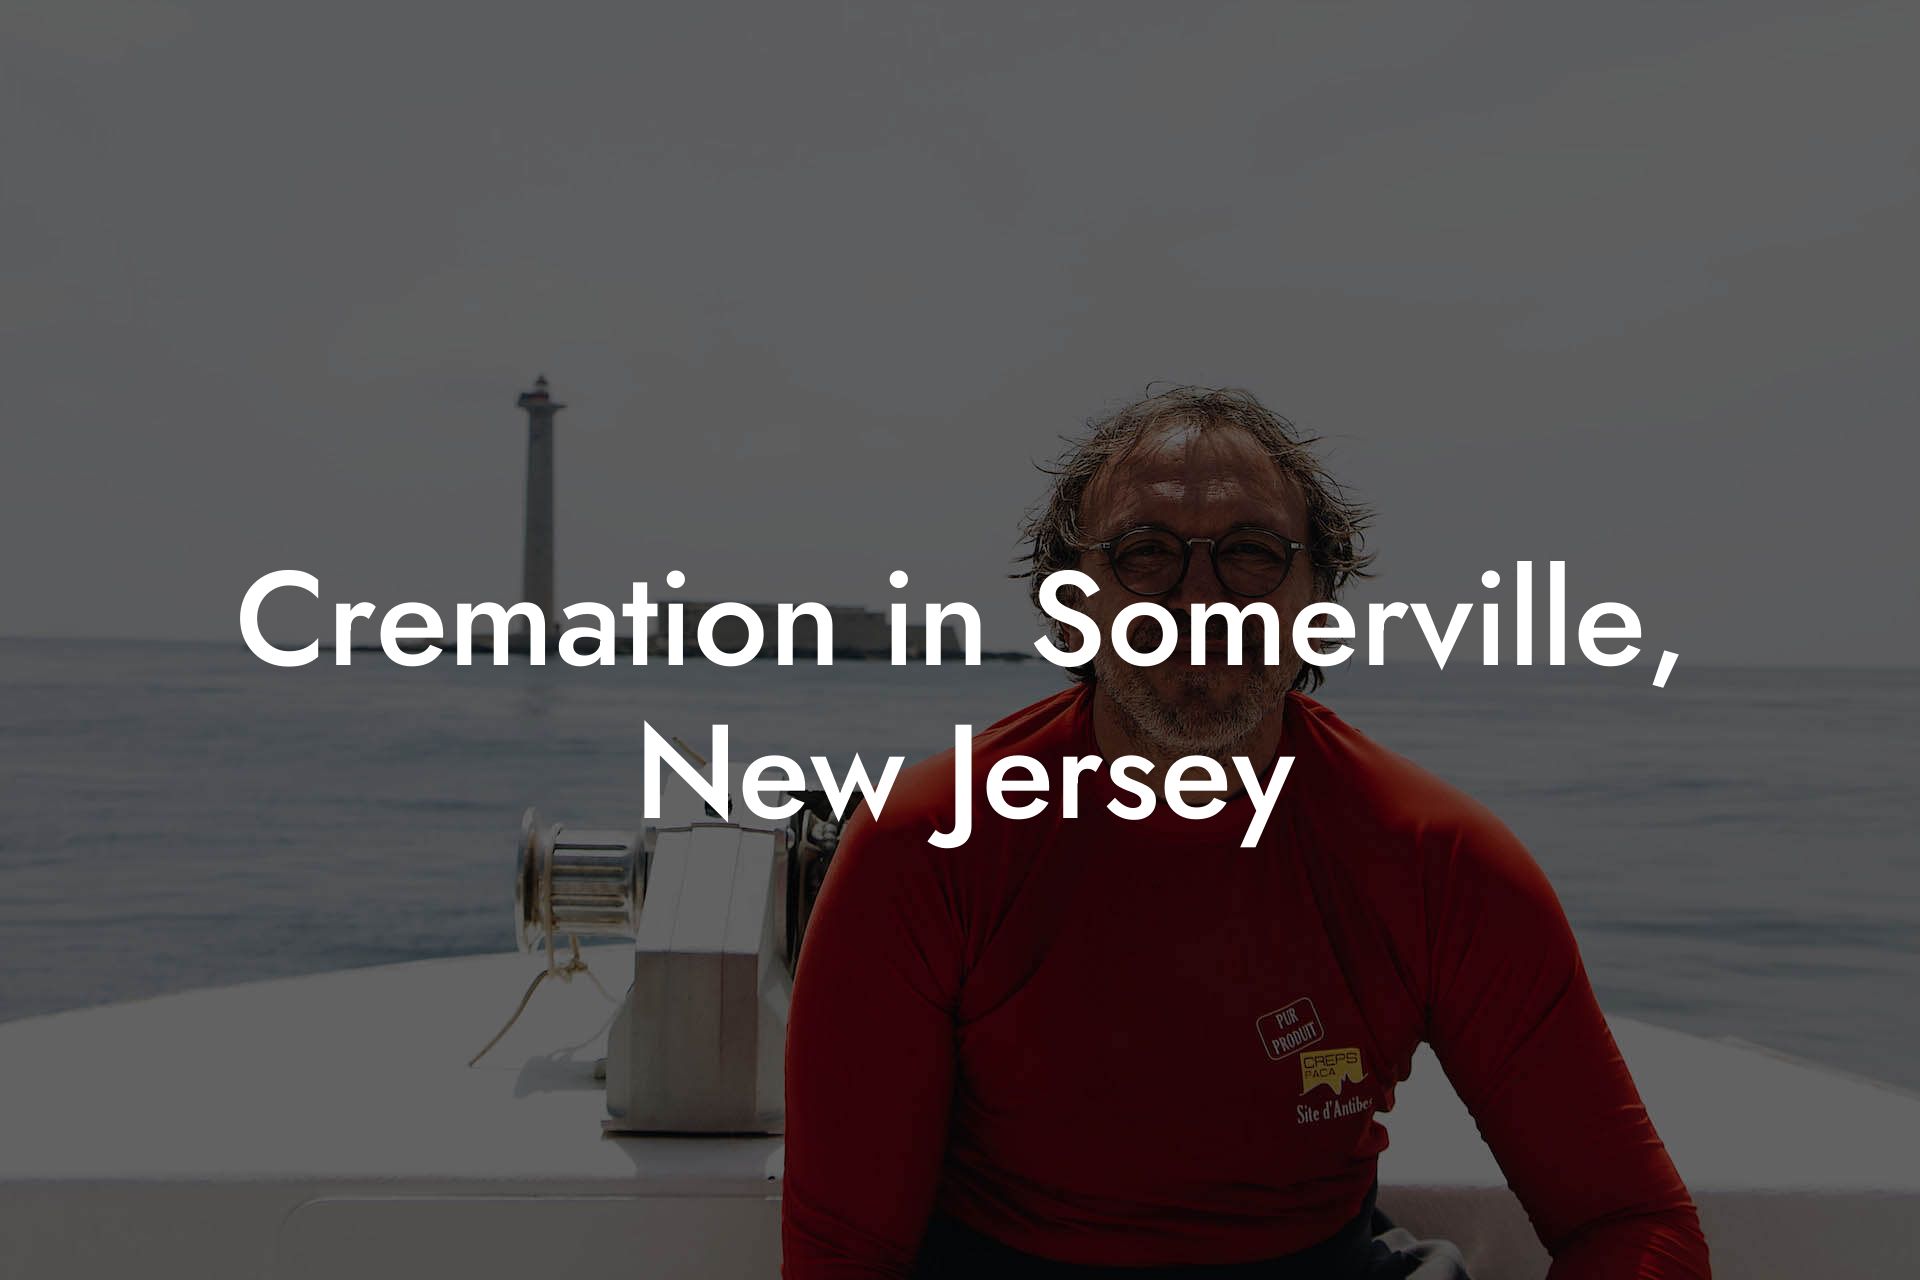 Cremation in Somerville, New Jersey